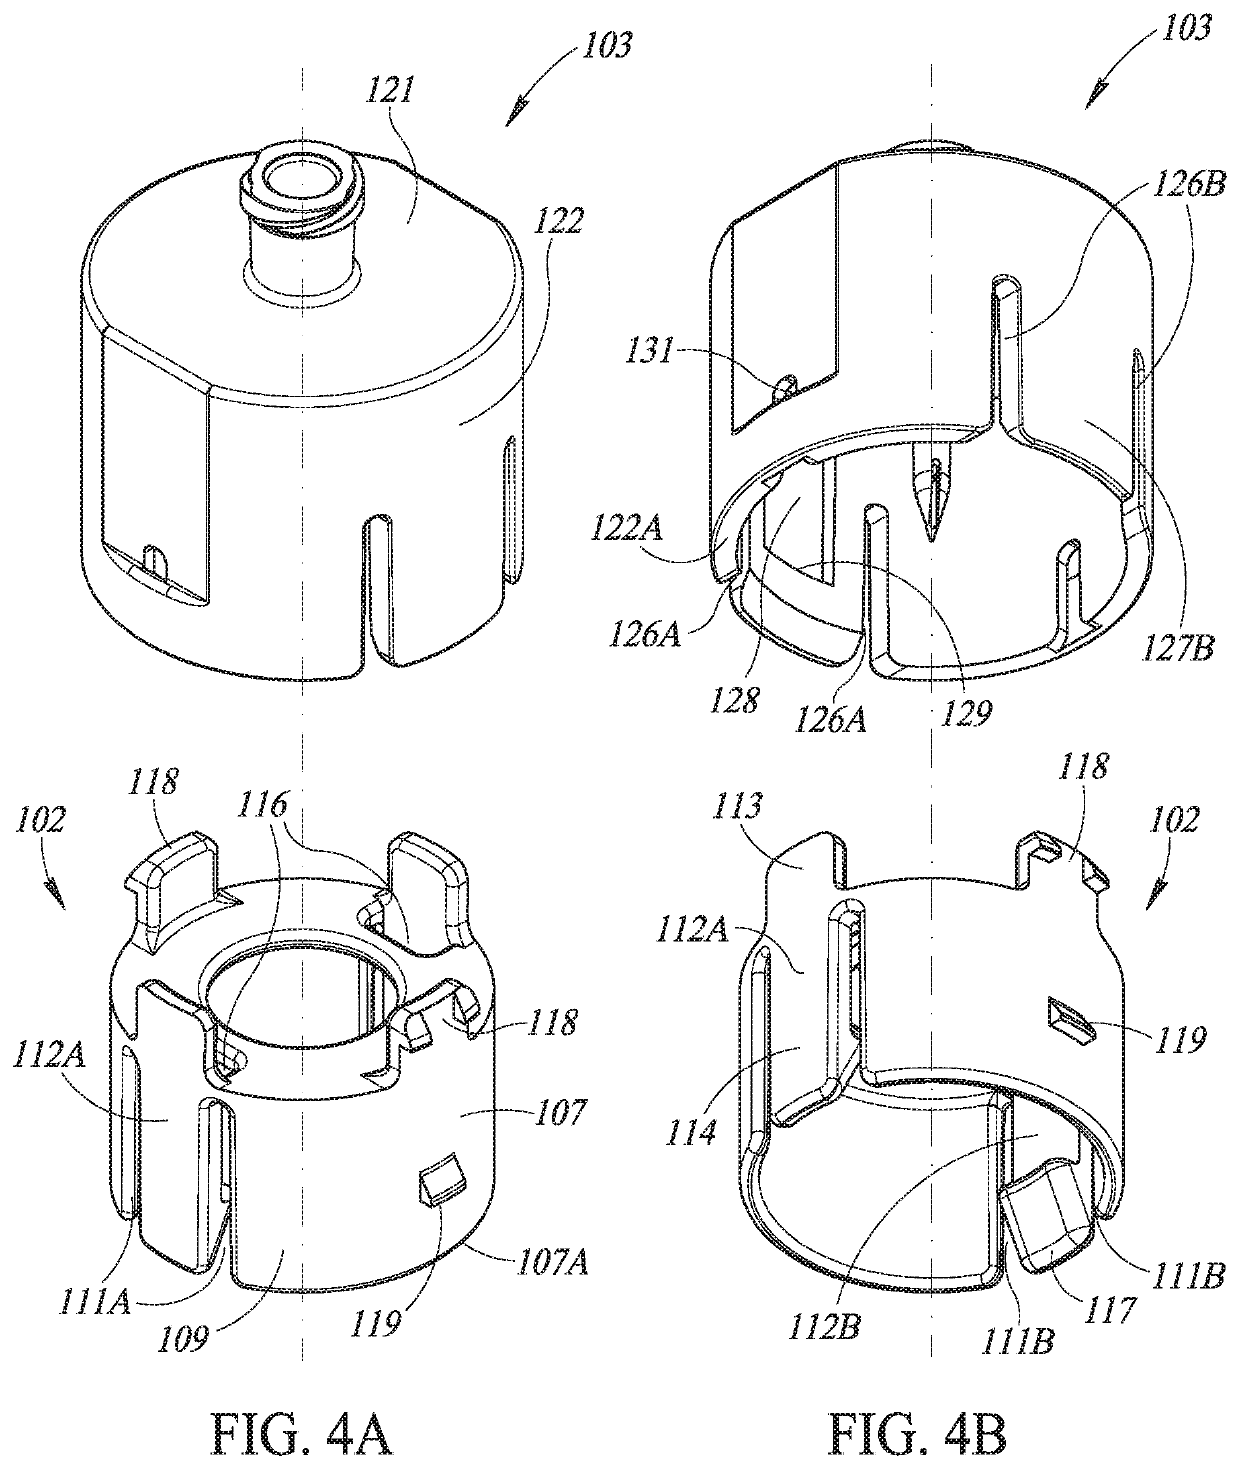 Liquid drug transfer devices for use with intact discrete injection vial release tool